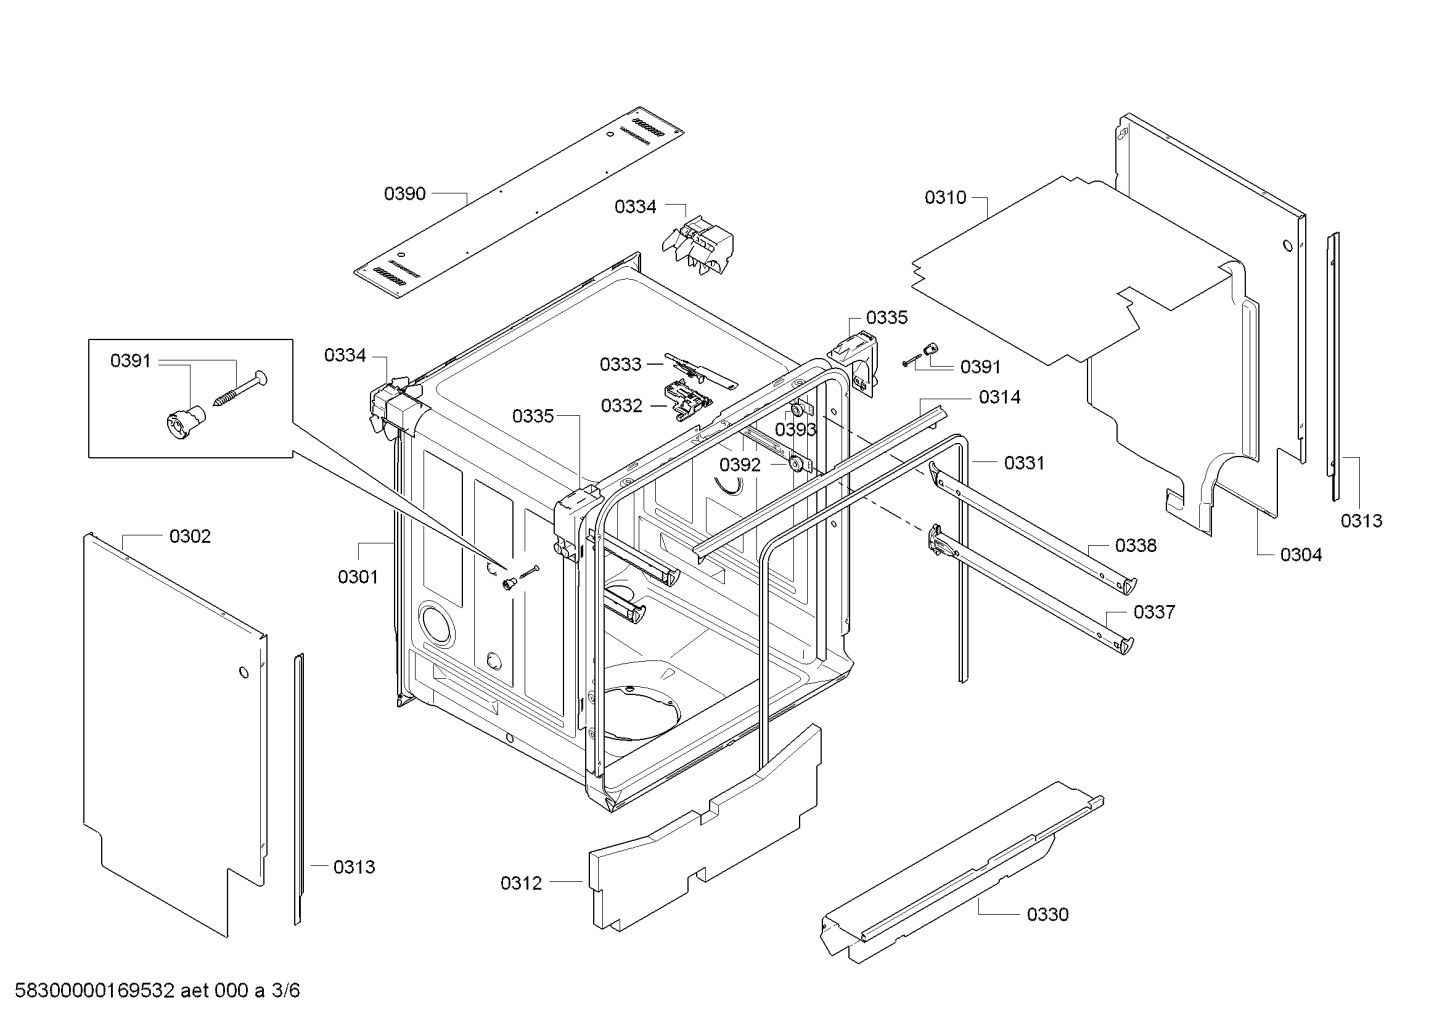 drawing_link_3_device_1639527